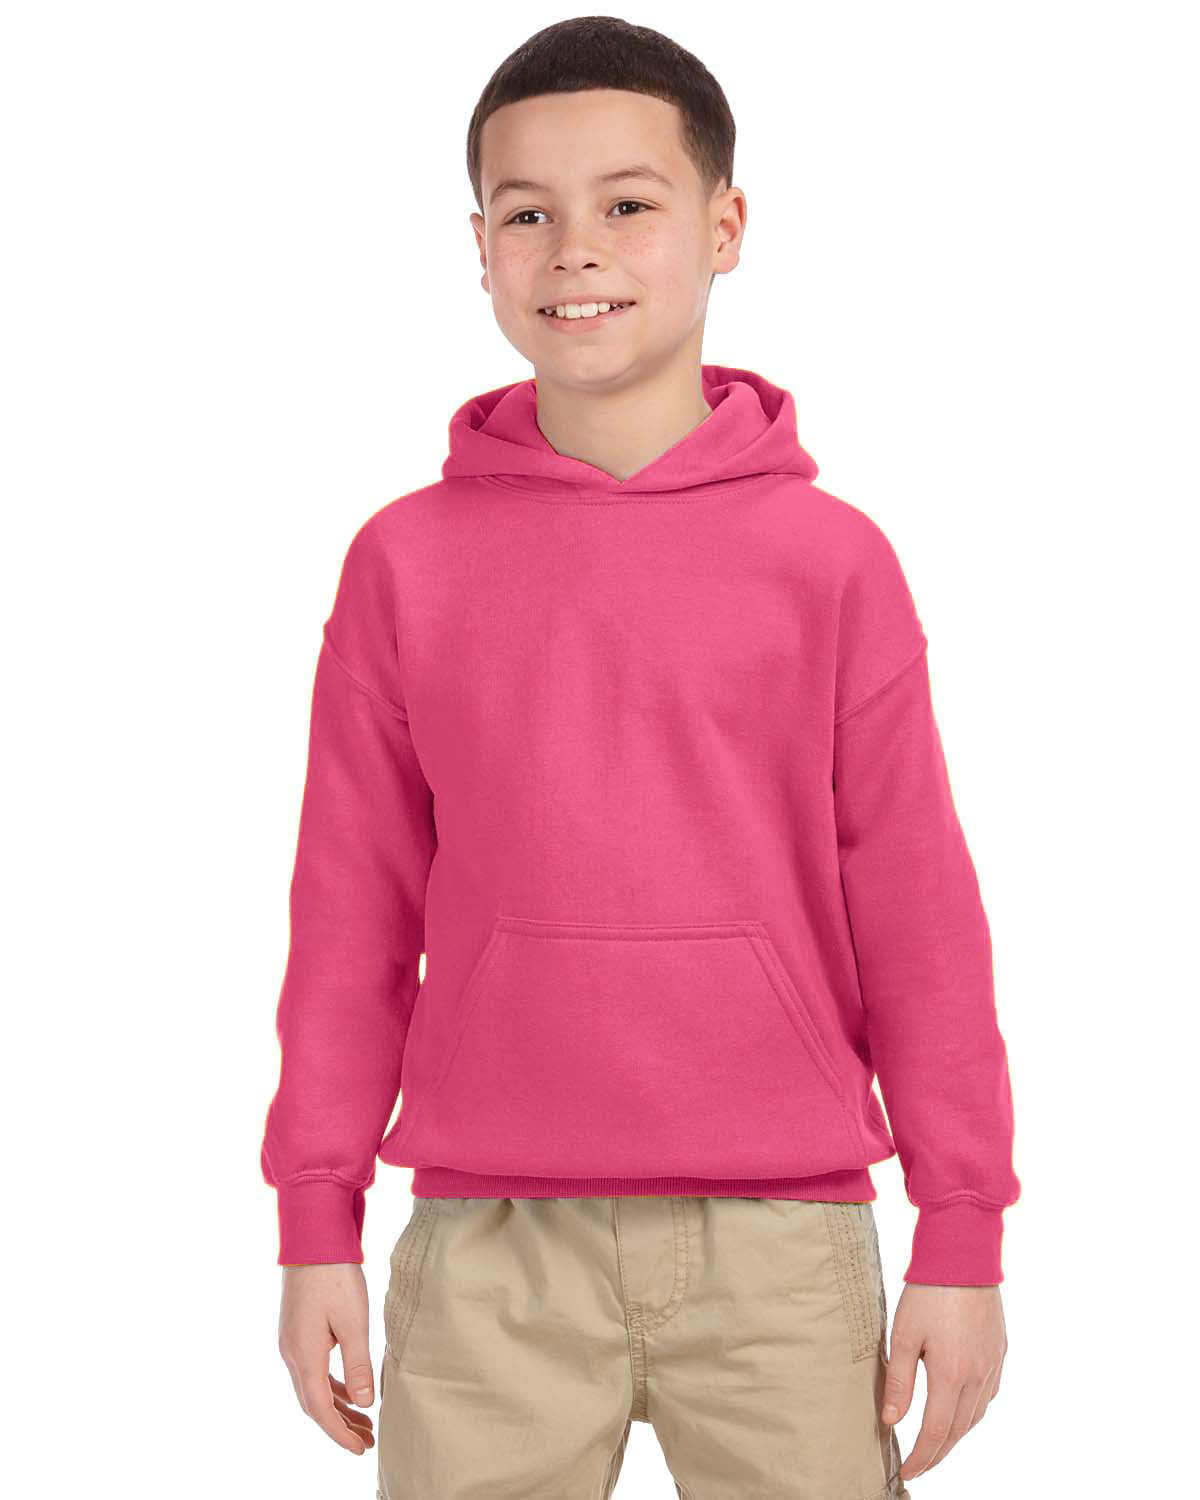 Youth Sweatshirts for Girls Teen Fashion Sweatshirt for Boys Plain Casual  Pullover Sweater Size 6-8 10-12 14-16 18-20 - S M L XL - Age 6 to 20 Years  Old White Kids Sweatshirt School Uniform 